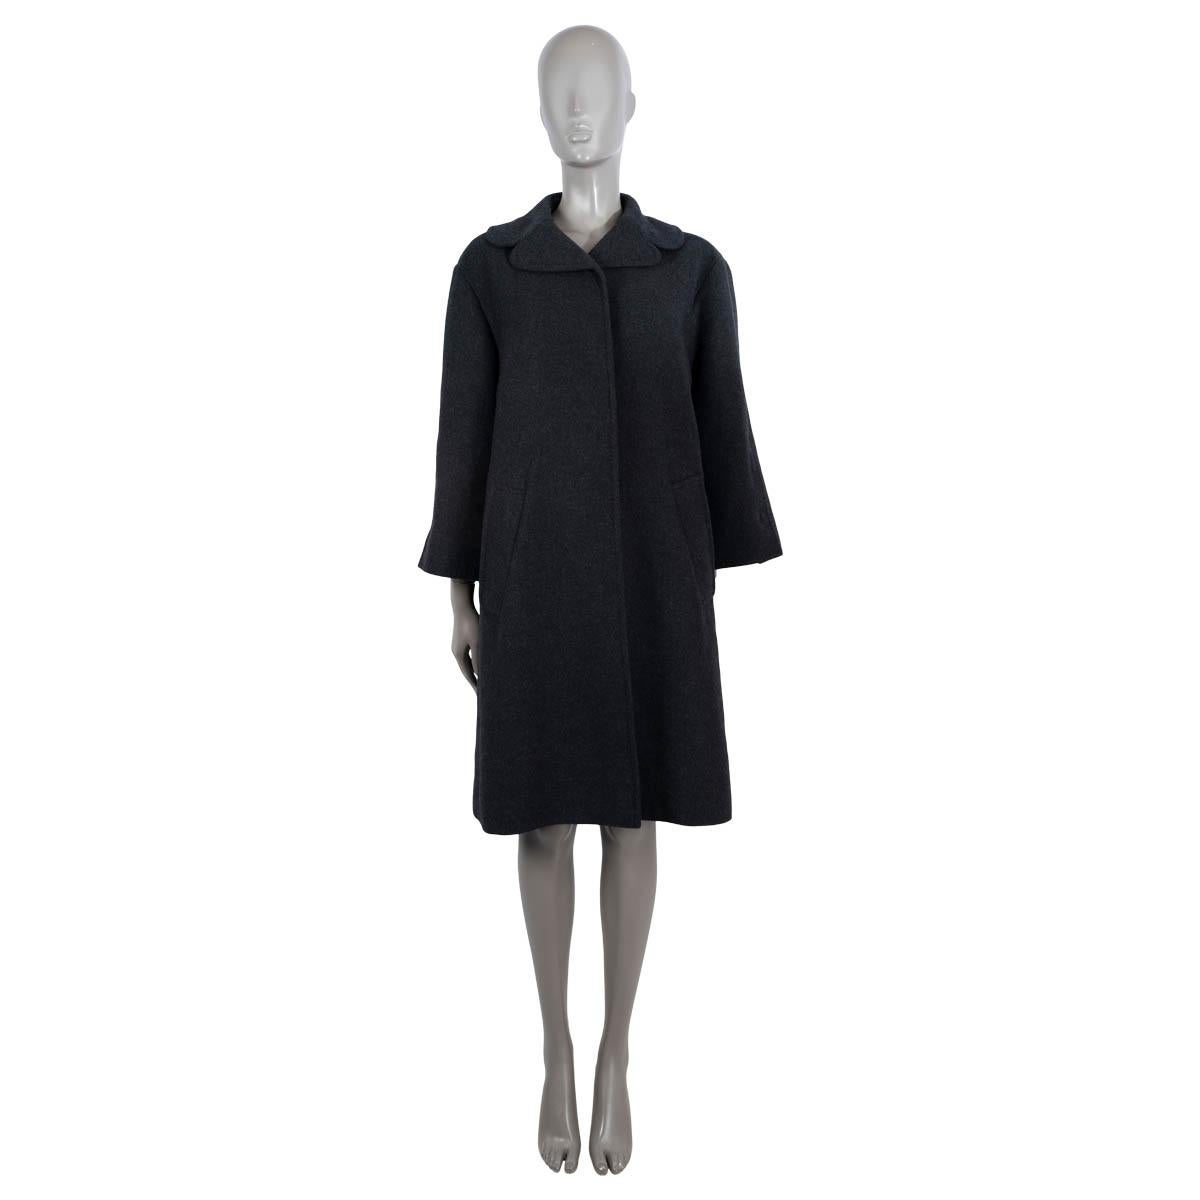 100% authentic Dolce & Gabbana coat in dark grey cashmere (100%). Features rounded notch lapels and two slant pockets at the waist. Opens with concealed buttons. Unlined. Has been worn and is in excellent condition.

Measurements
Tag